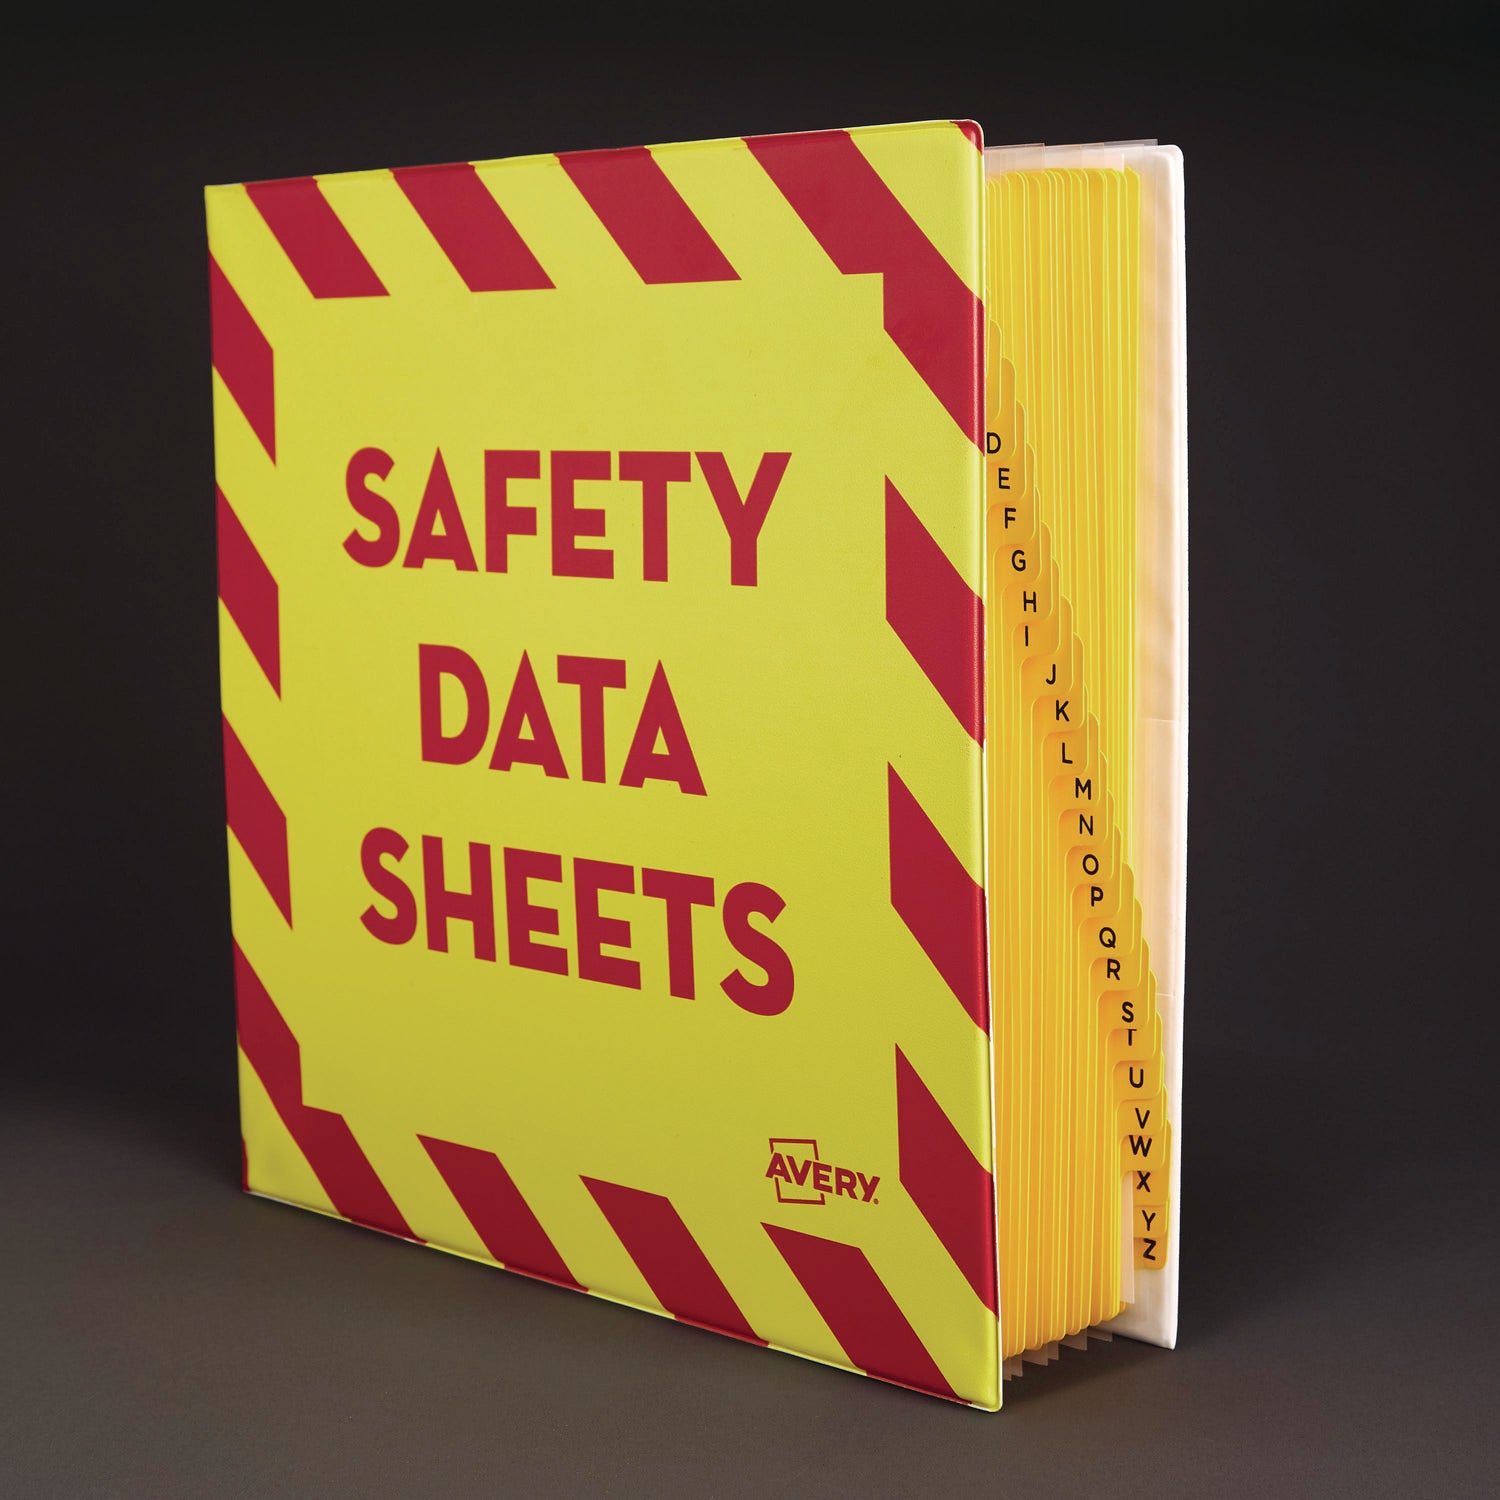 heavy-duty-preprinted-safety-data-sheet-binder-3-rings-15-capacity-11-x-85-yellow-red_ave18950 - 5